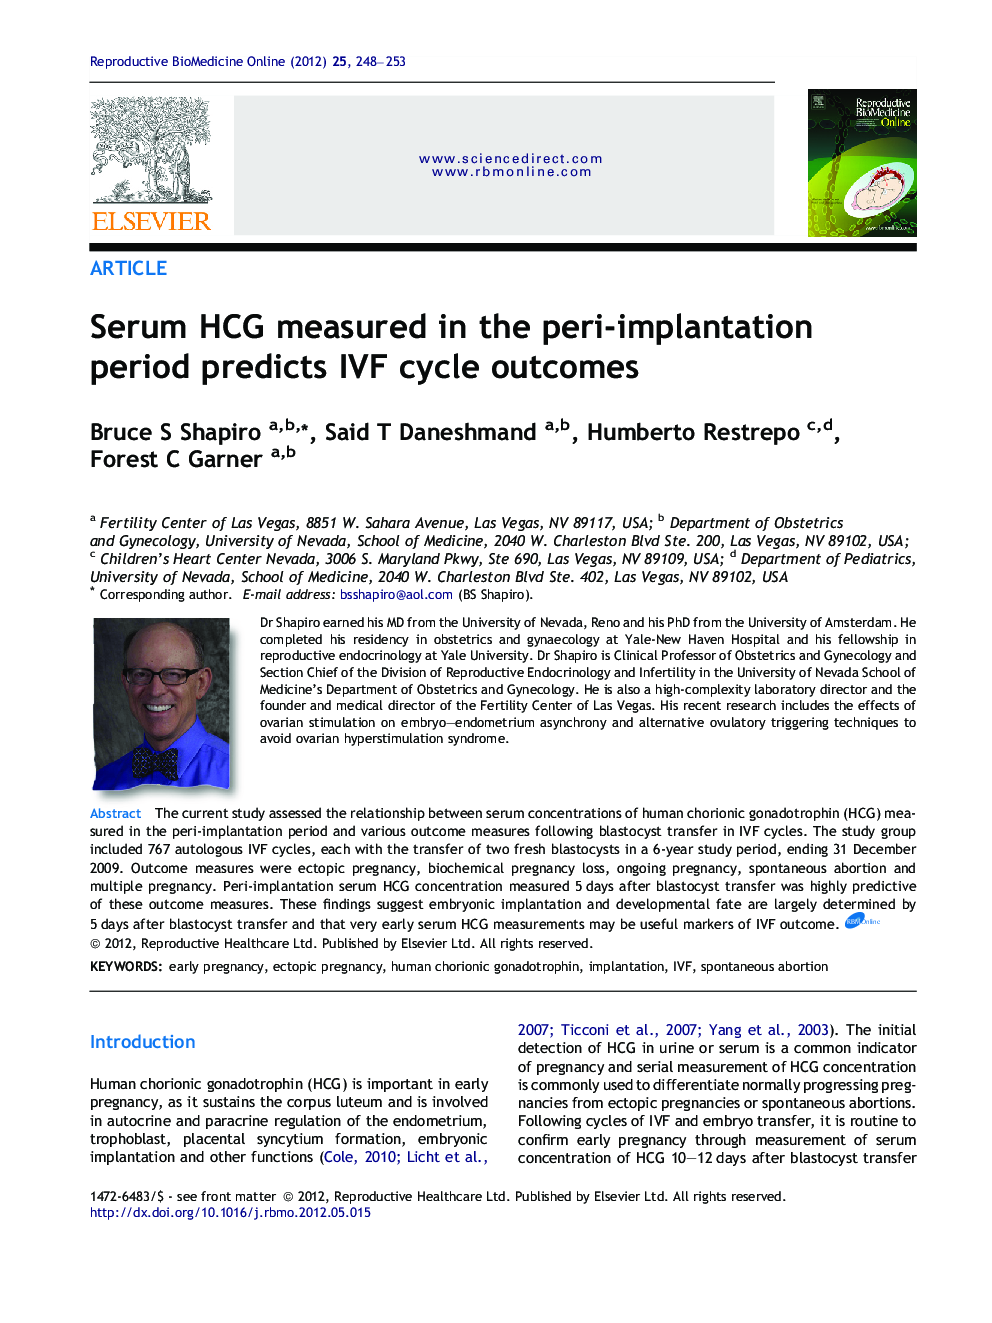 Serum HCG measured in the peri-implantation period predicts IVF cycle outcomes 